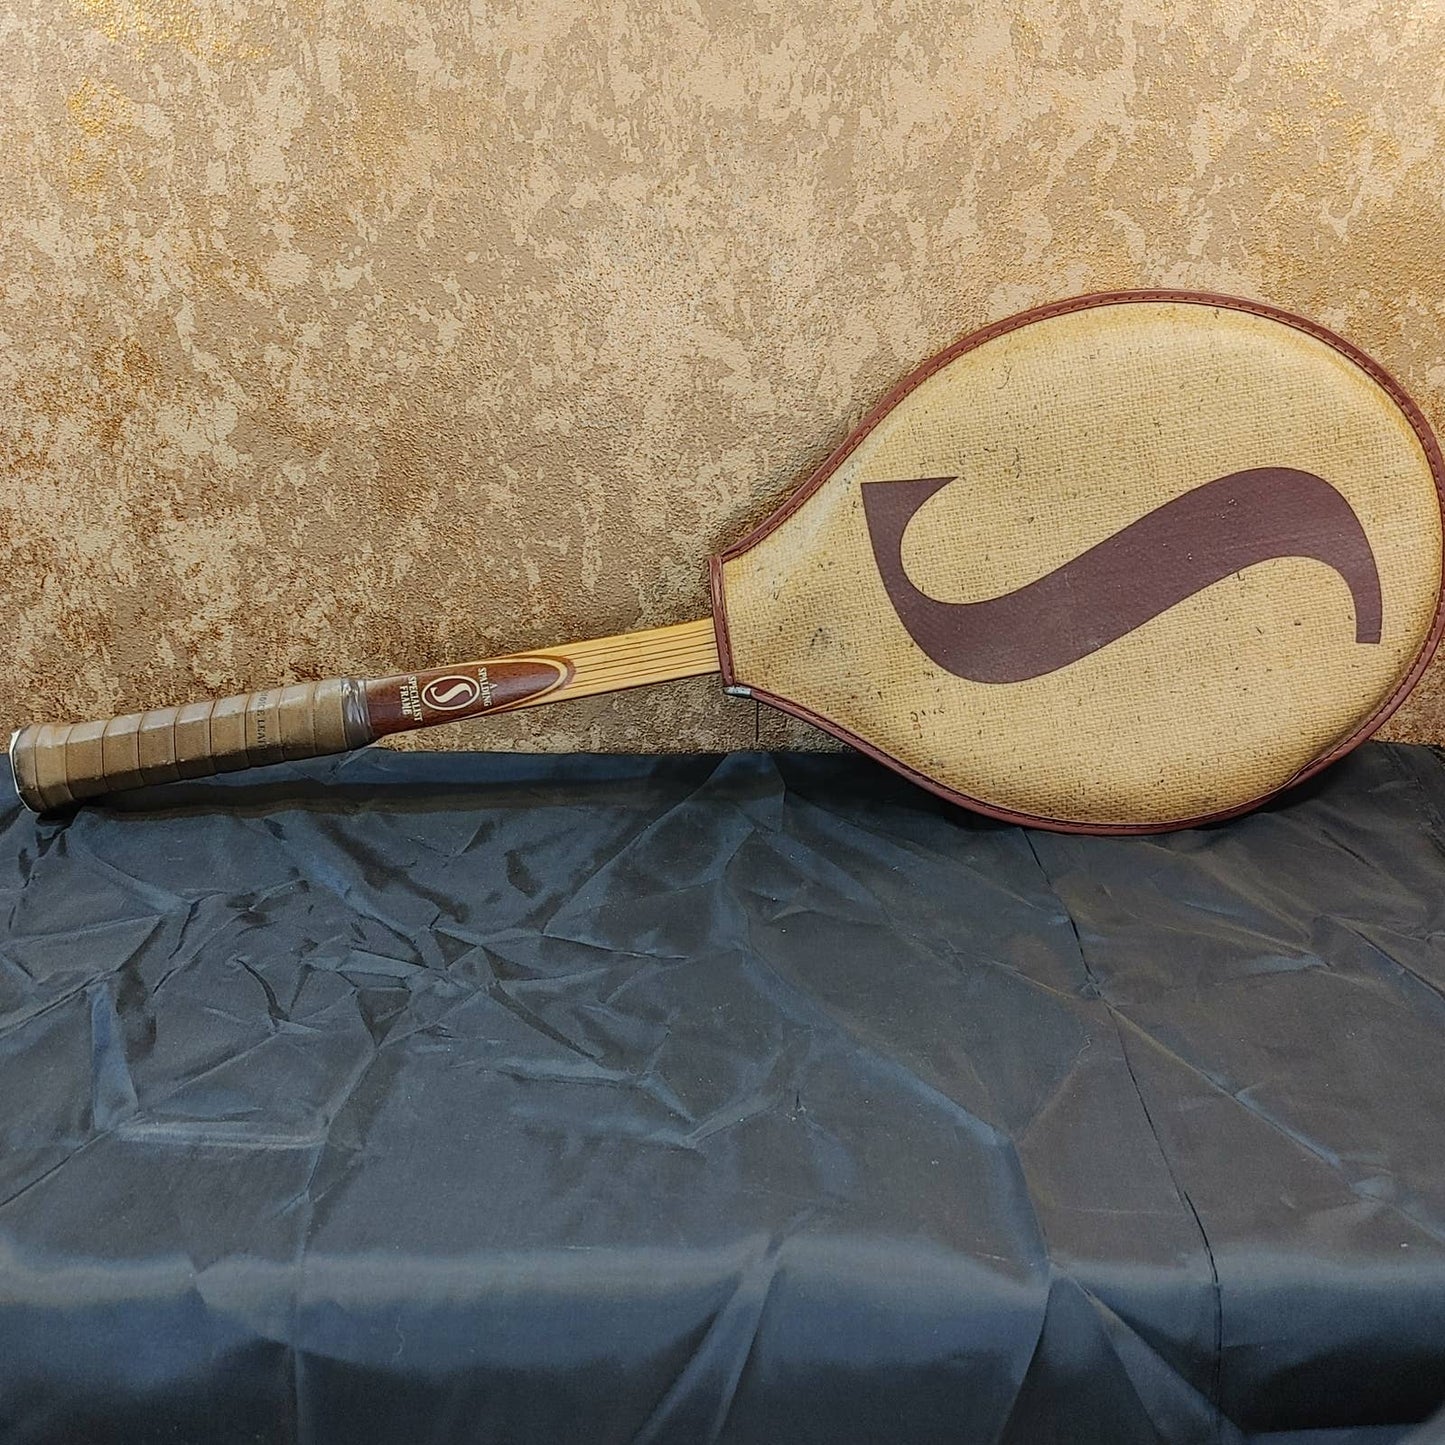 What a Racquet! Vintage Spalding Natural Wood Tennis Cover Excellent Free Ship!